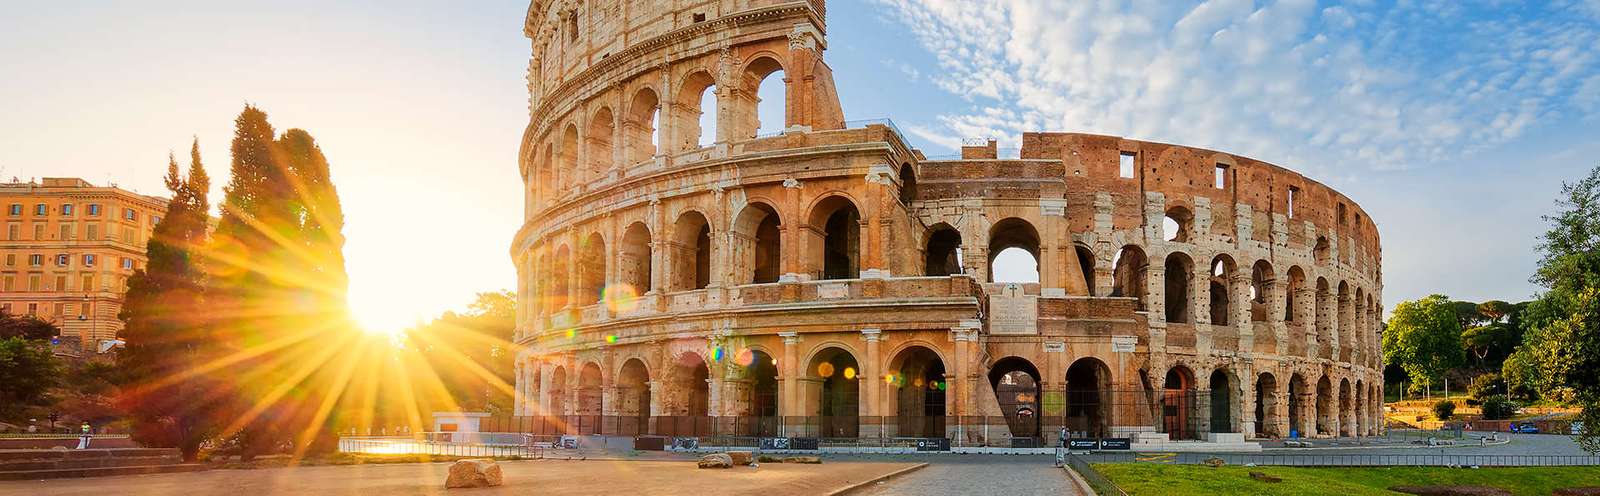 Il colosseo puzzle online